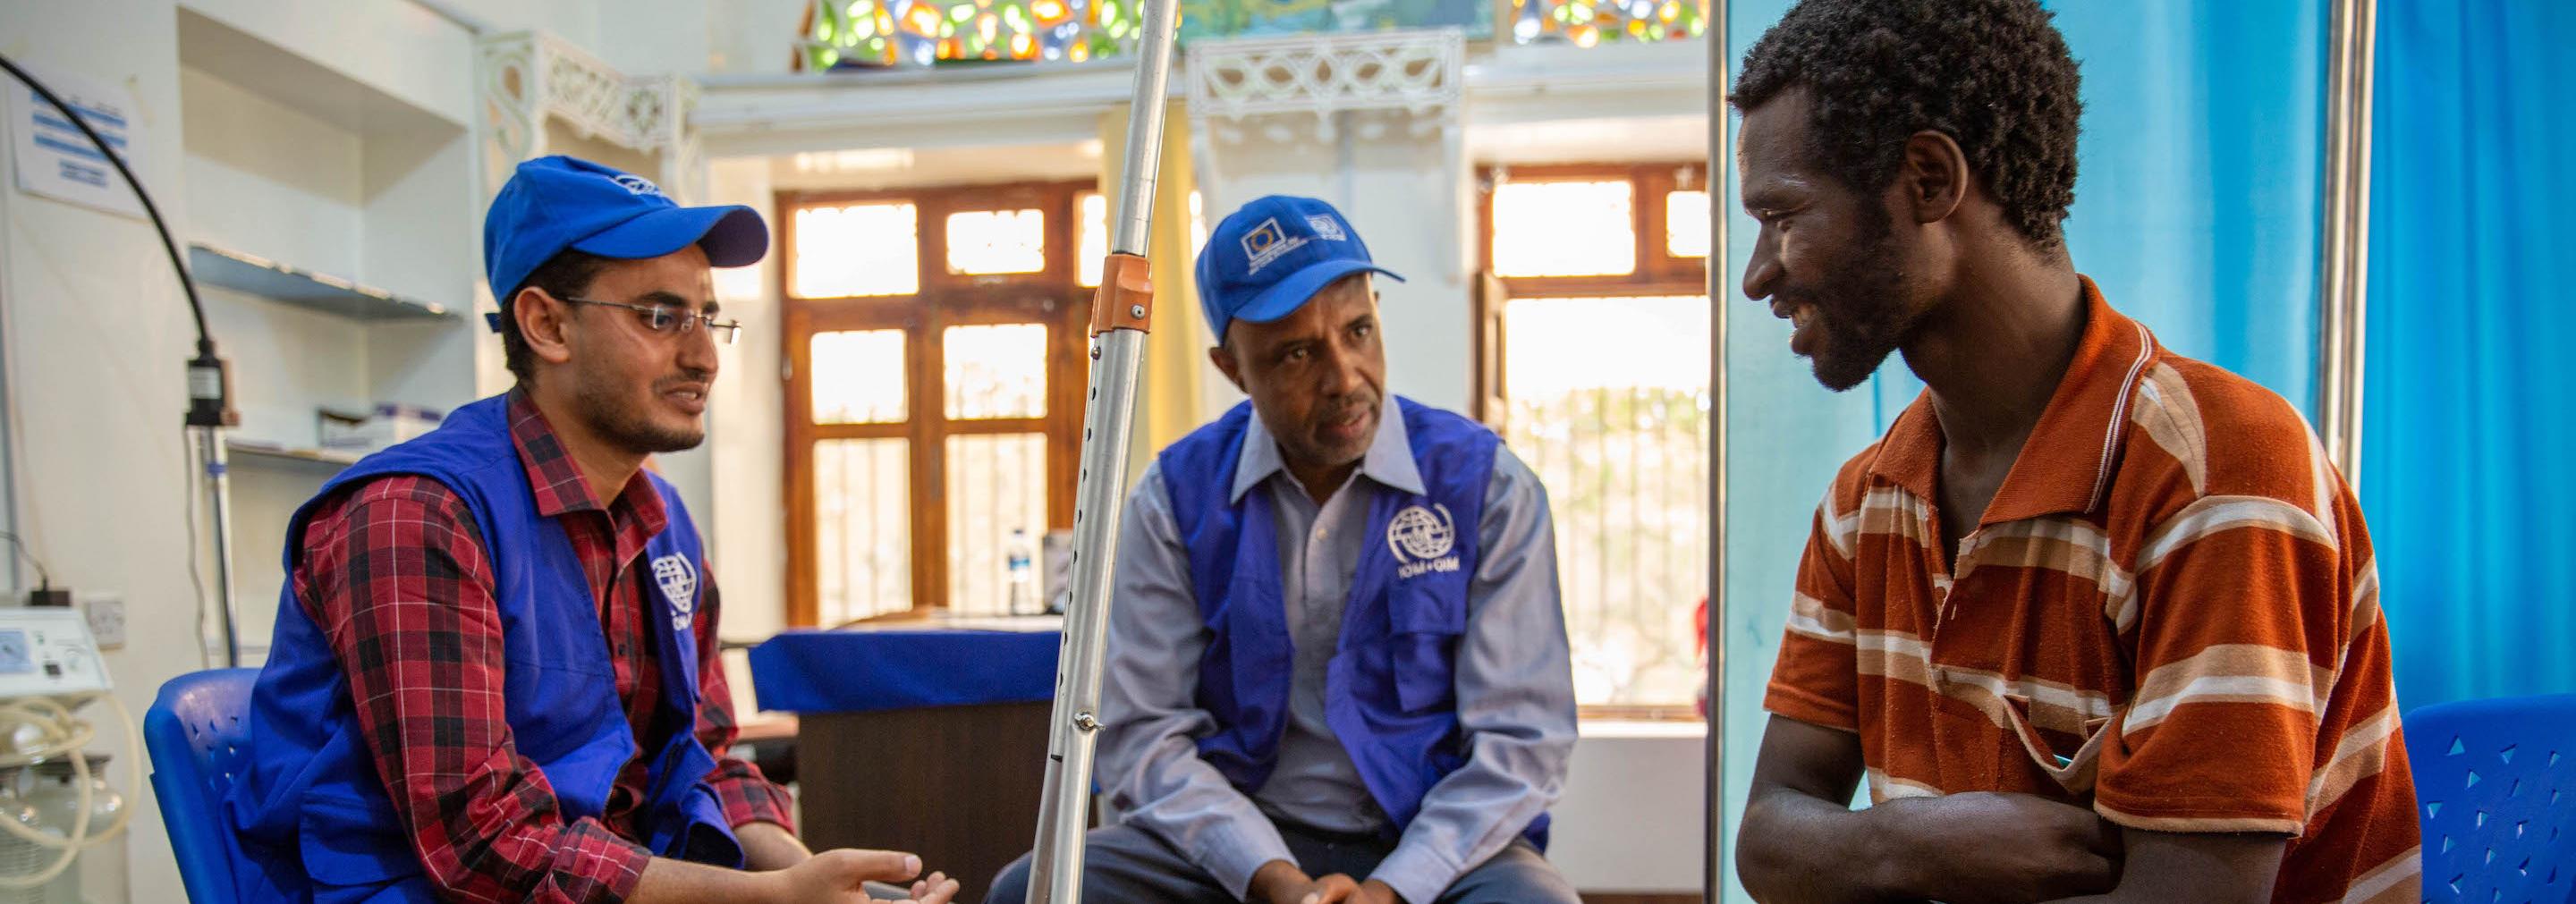 Through the help of an interpreter, an IOM doctor checks in with a migrant who was injured in Yemen and is receiving follow care from IOM. Credit Olivia Headon copyright IOM 2019